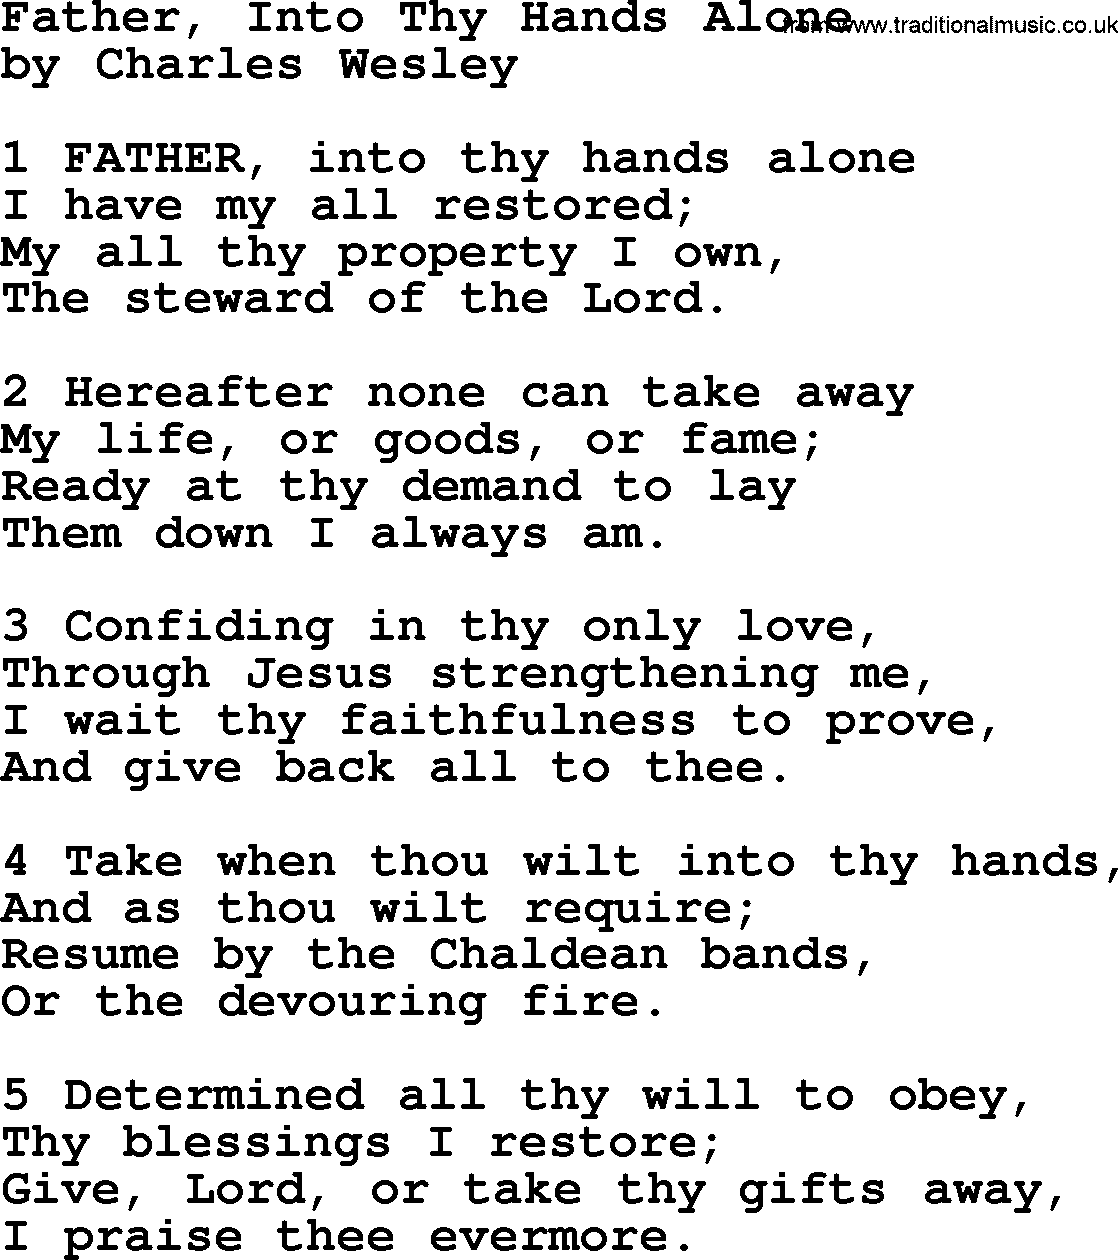 Charles Wesley hymn: Father, Into Thy Hands Alone, lyrics